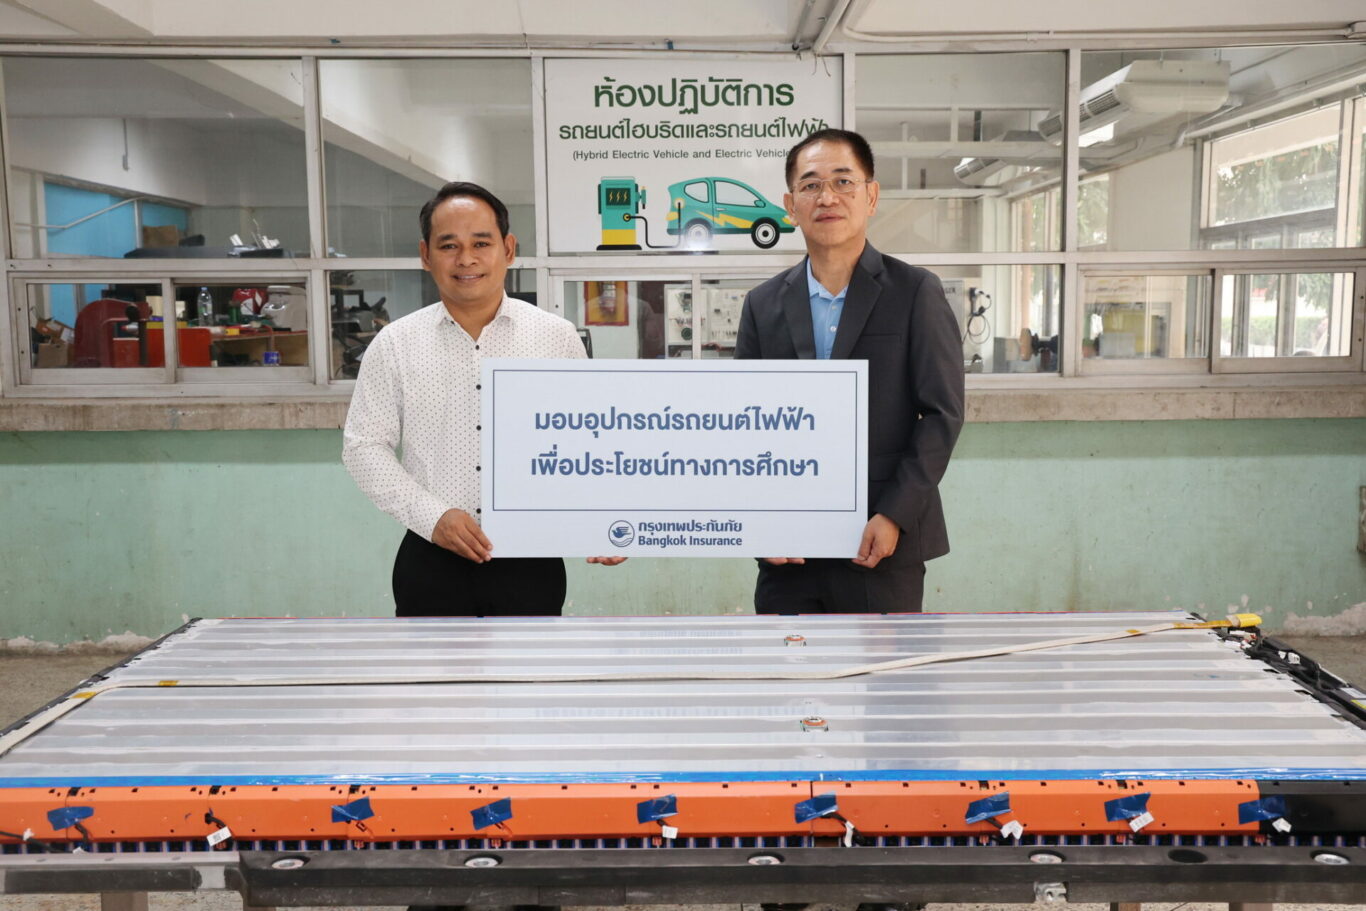 Men holding a sign in front of a conveyor belt

Description automatically generated